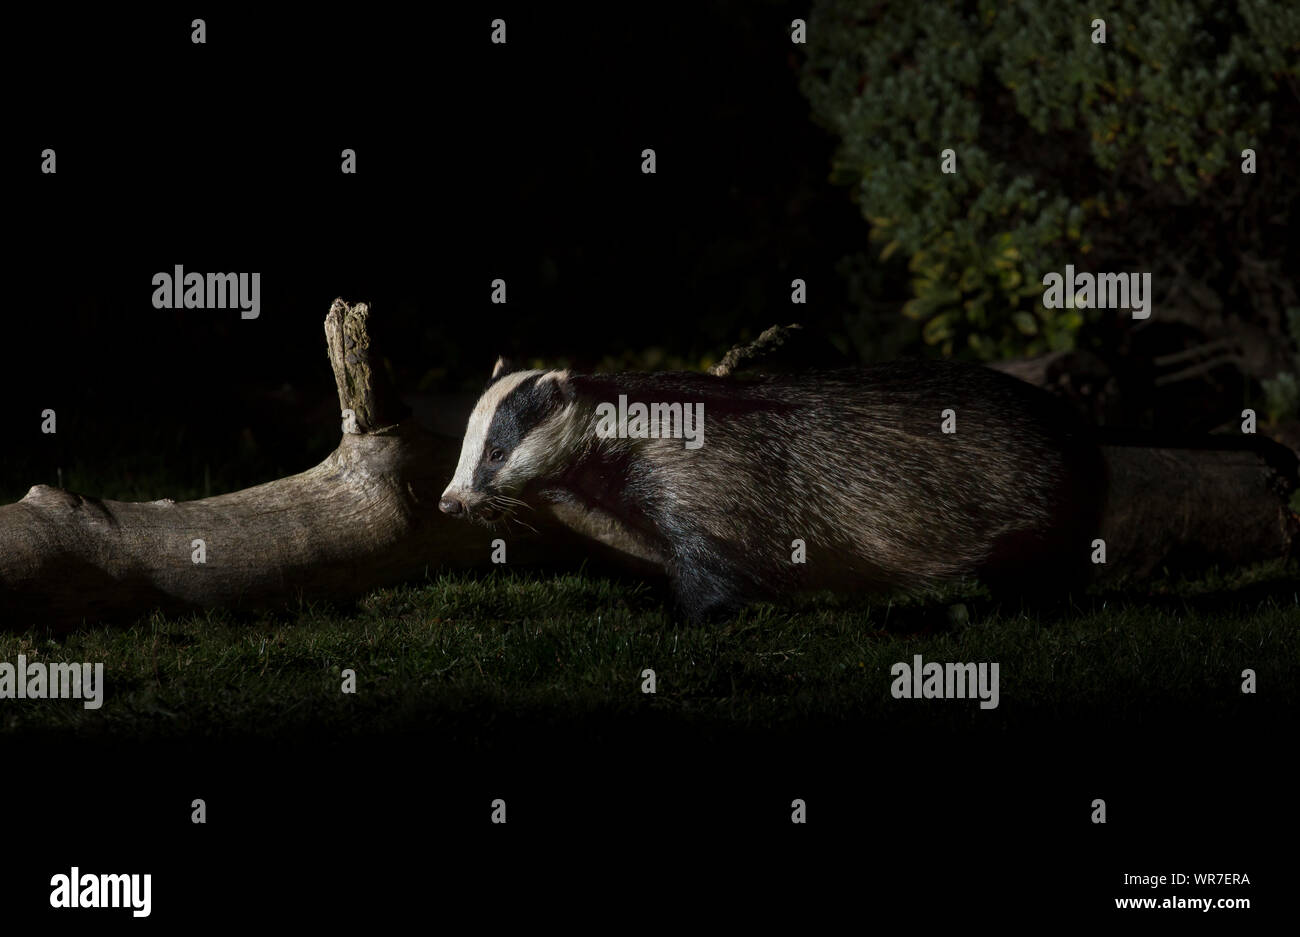 Close-up side view of a wild, urban British badger (Meles meles UK) isolated outdoors in the dark, foraging on the ground in a UK garden at night. Stock Photo